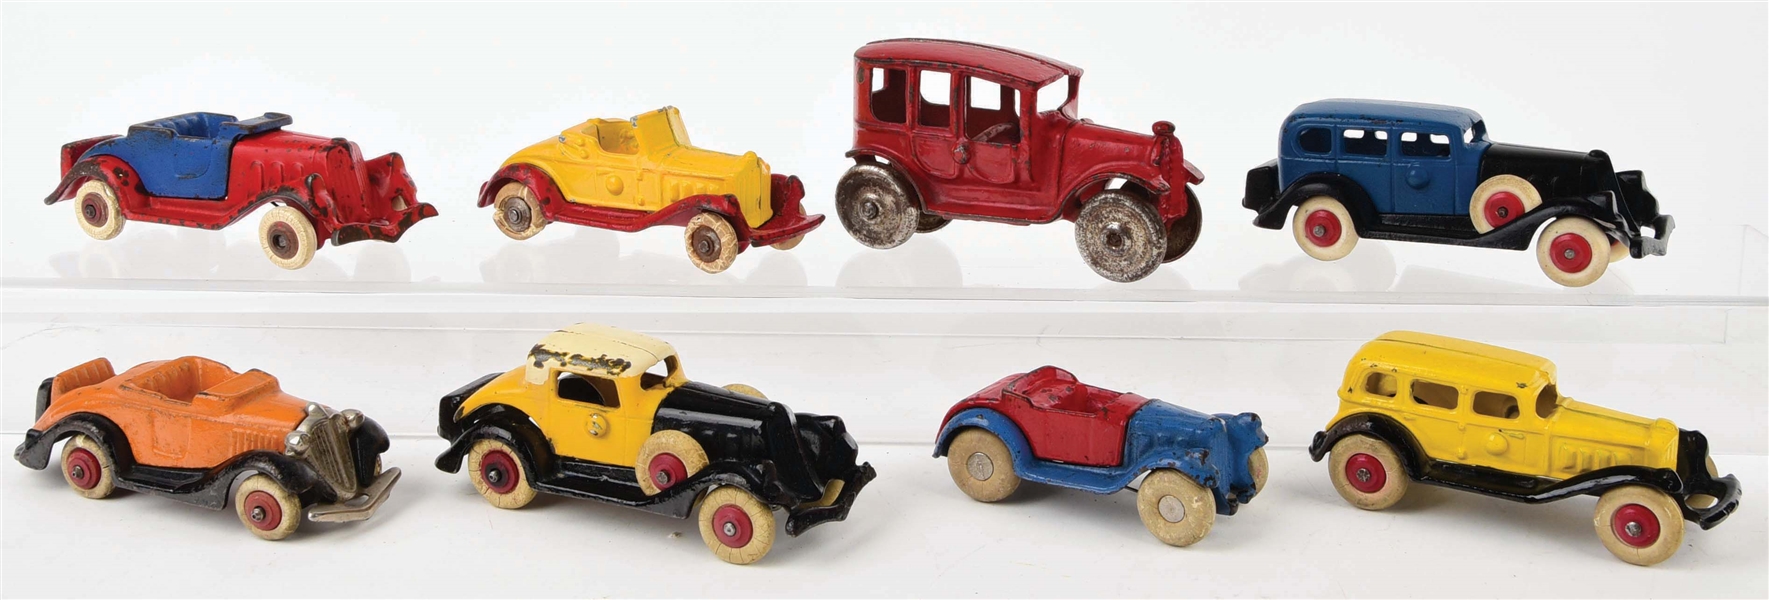 LOT OF 8: CAST-IRON AMERICAN MADE AUTOMOBILES.